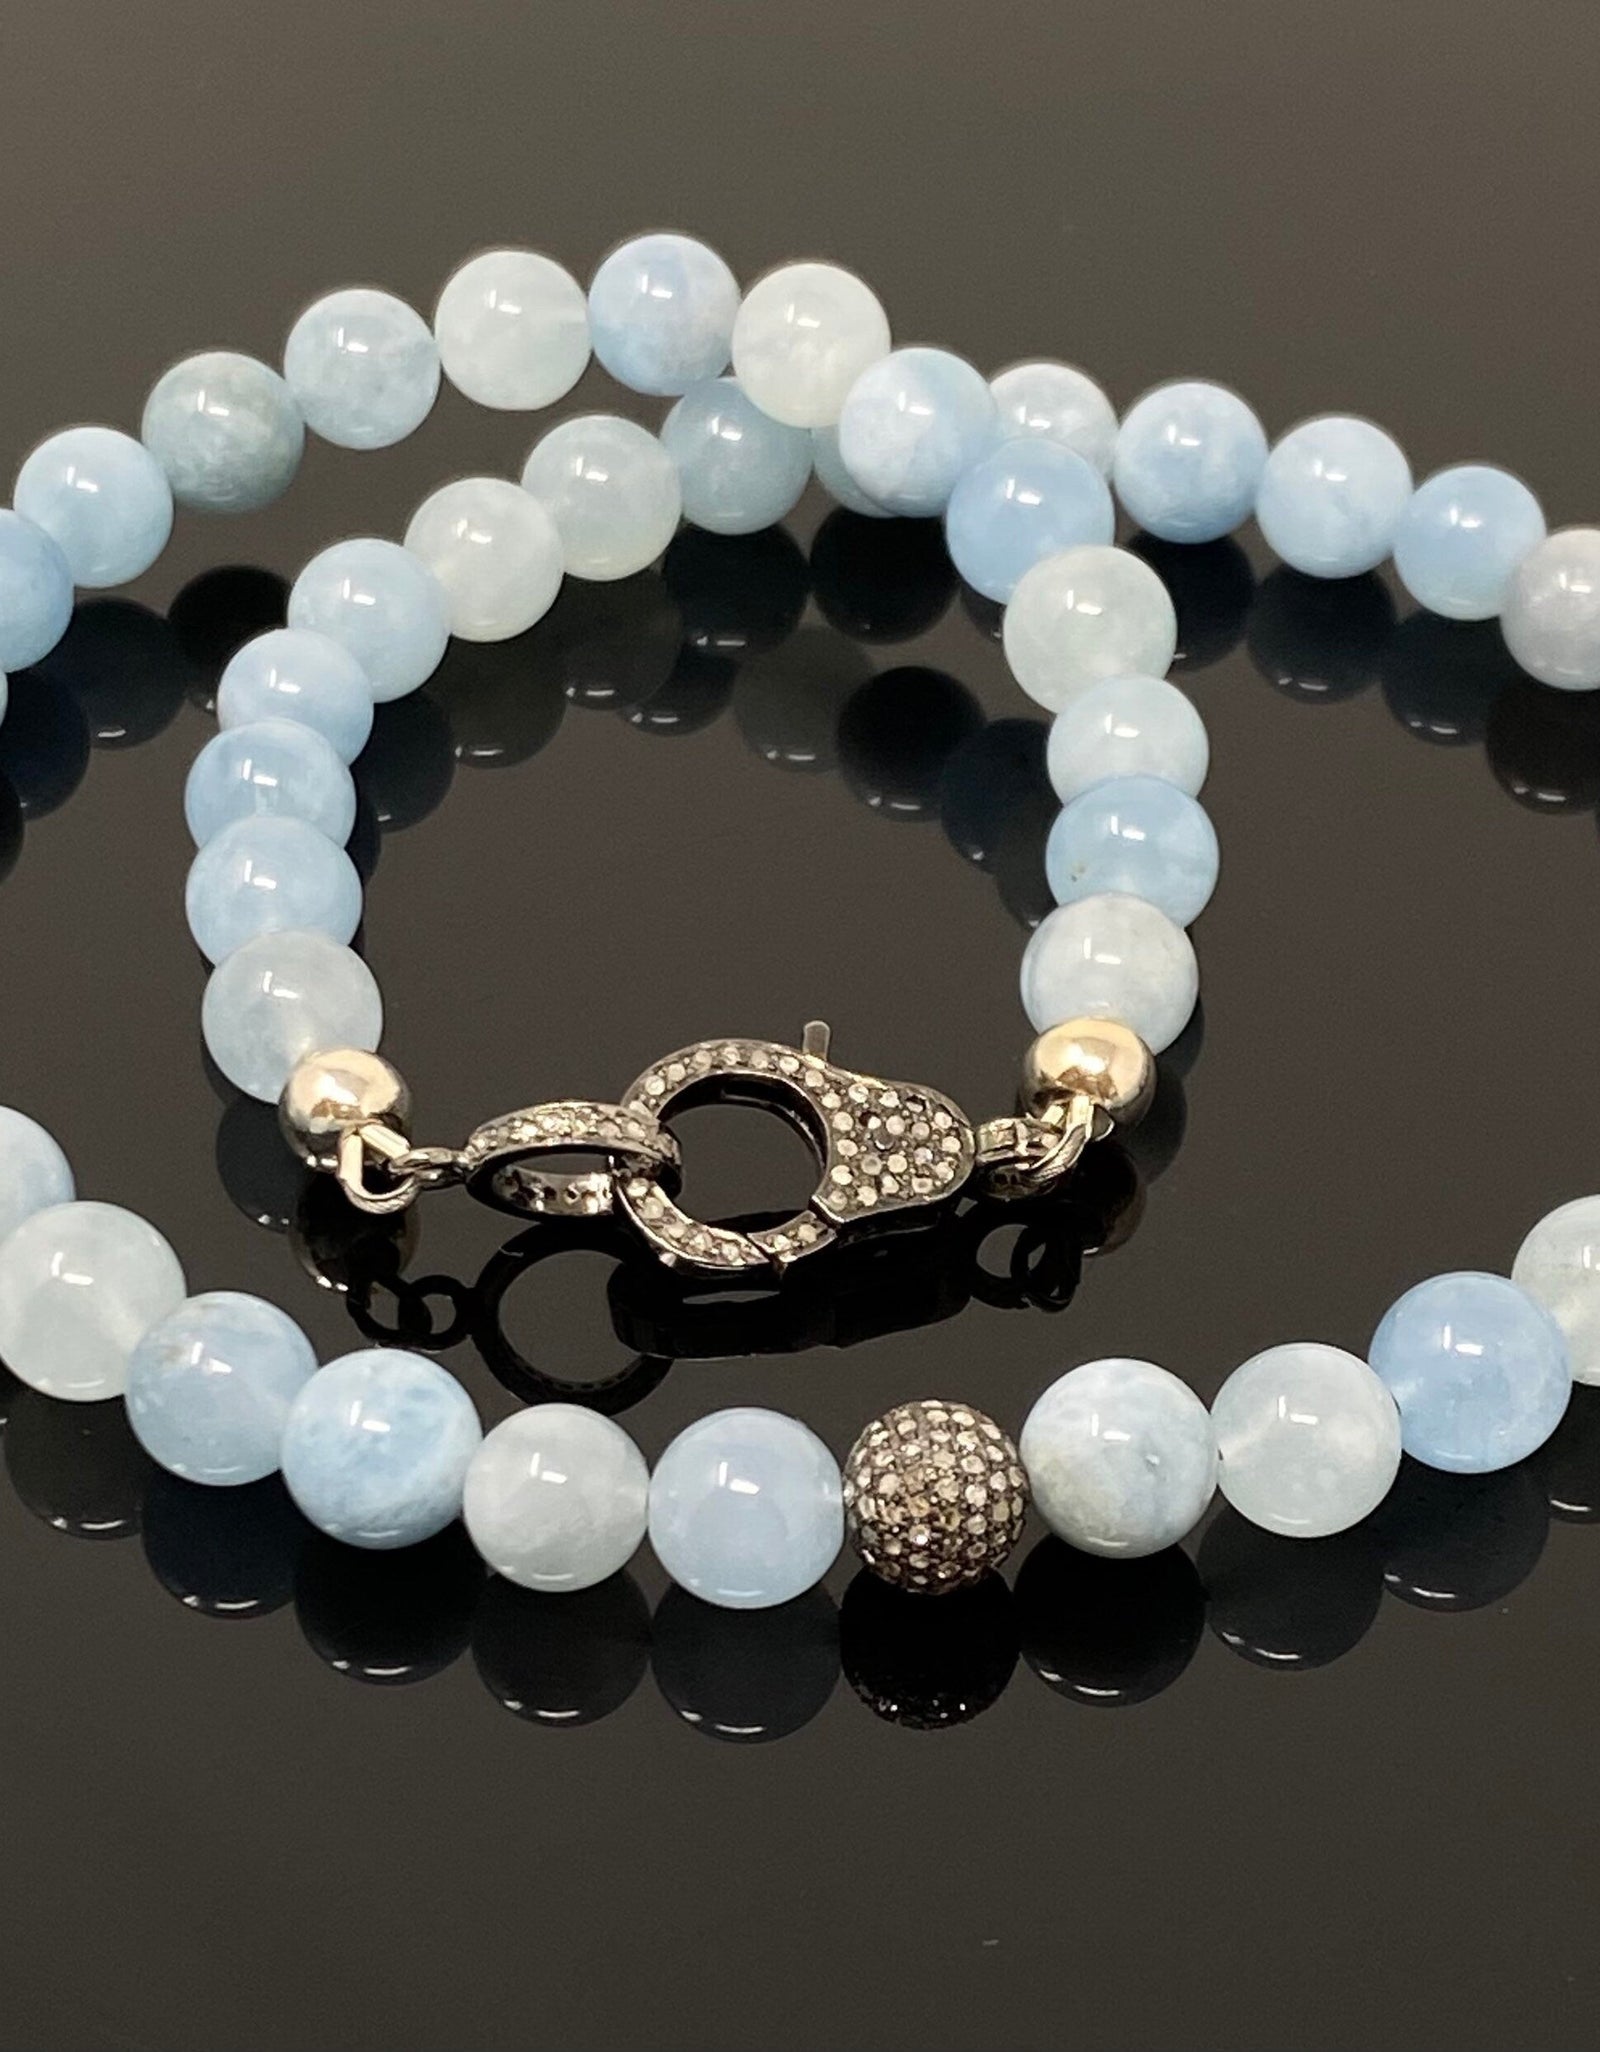 17” Natural Aquamarine Necklace with Pave Diamond Bead and Pave